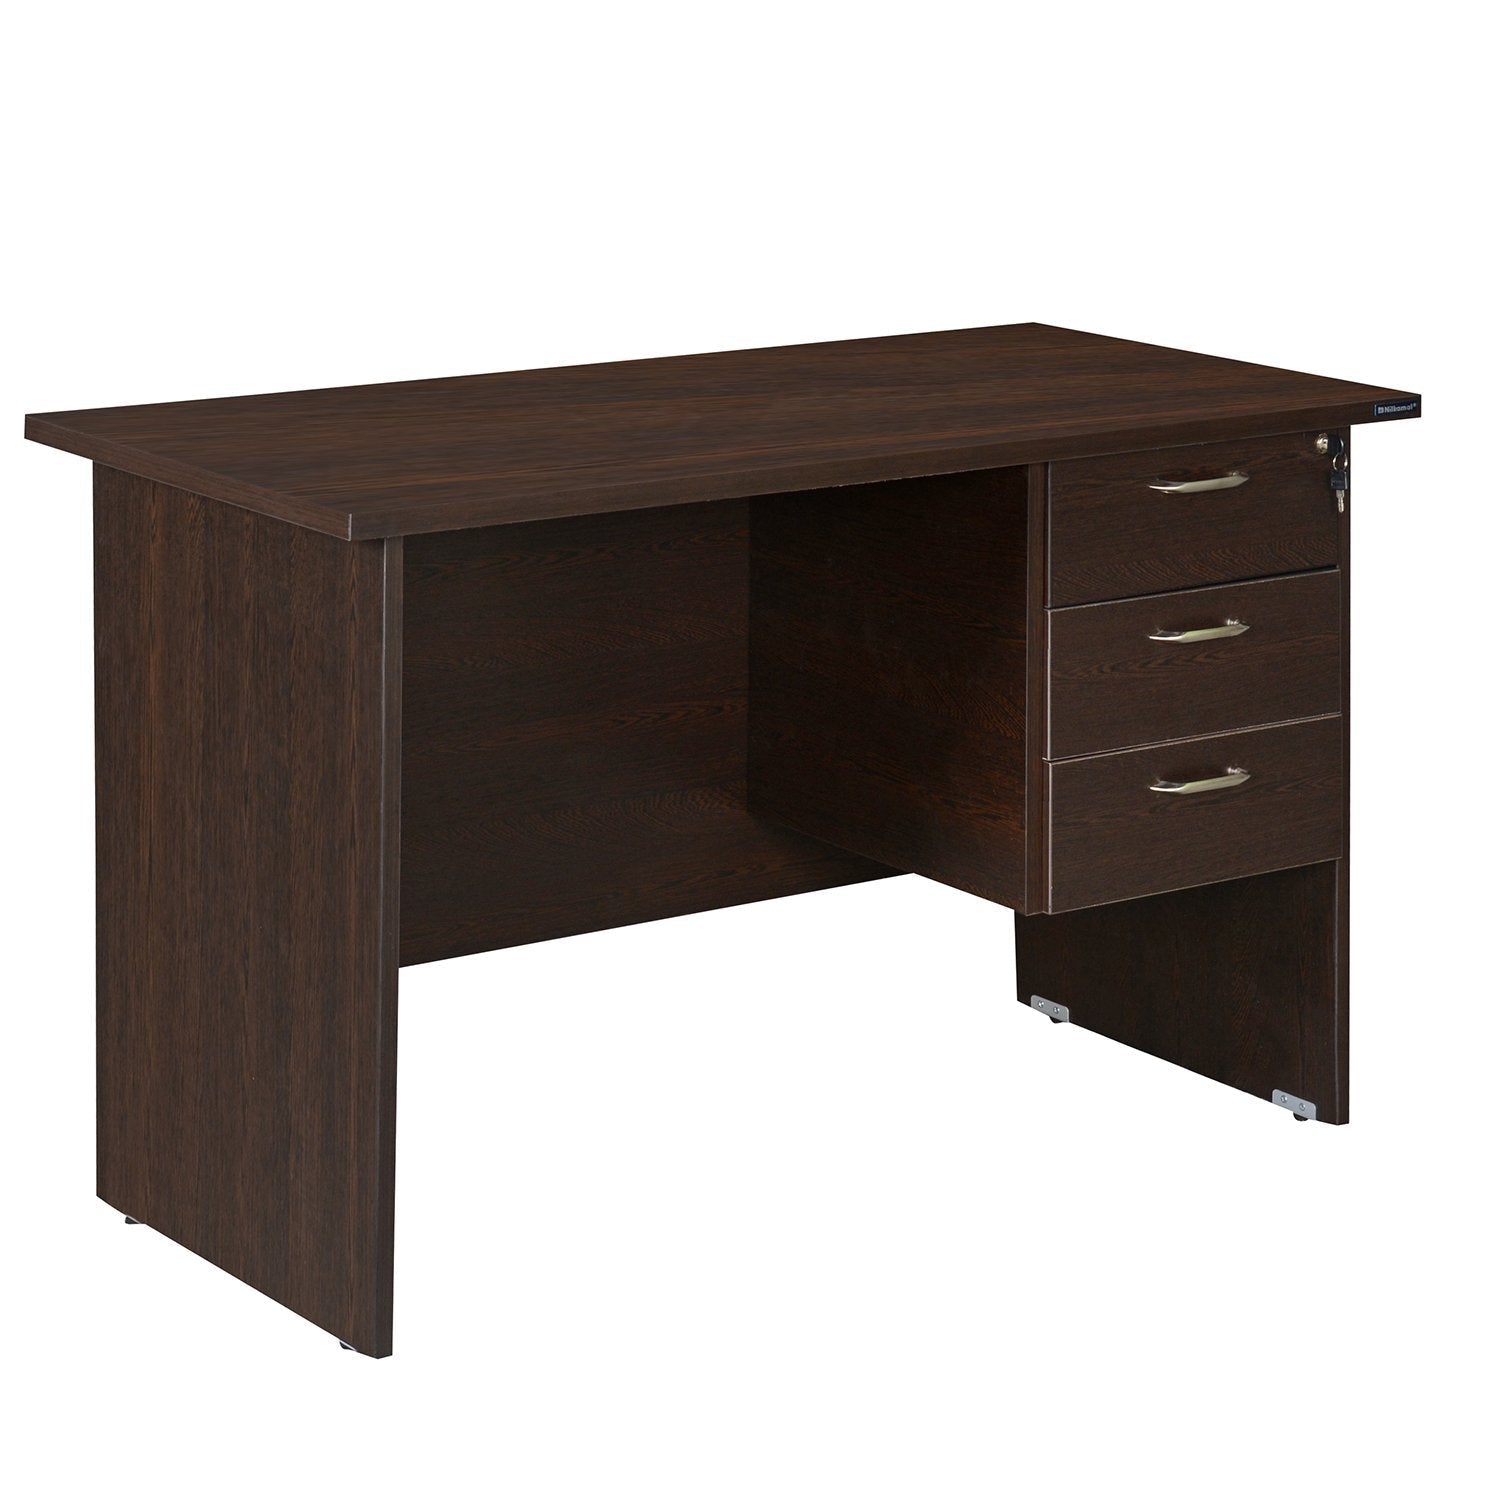 Compact 3 feet Office Table. Order now @HOG marketplace